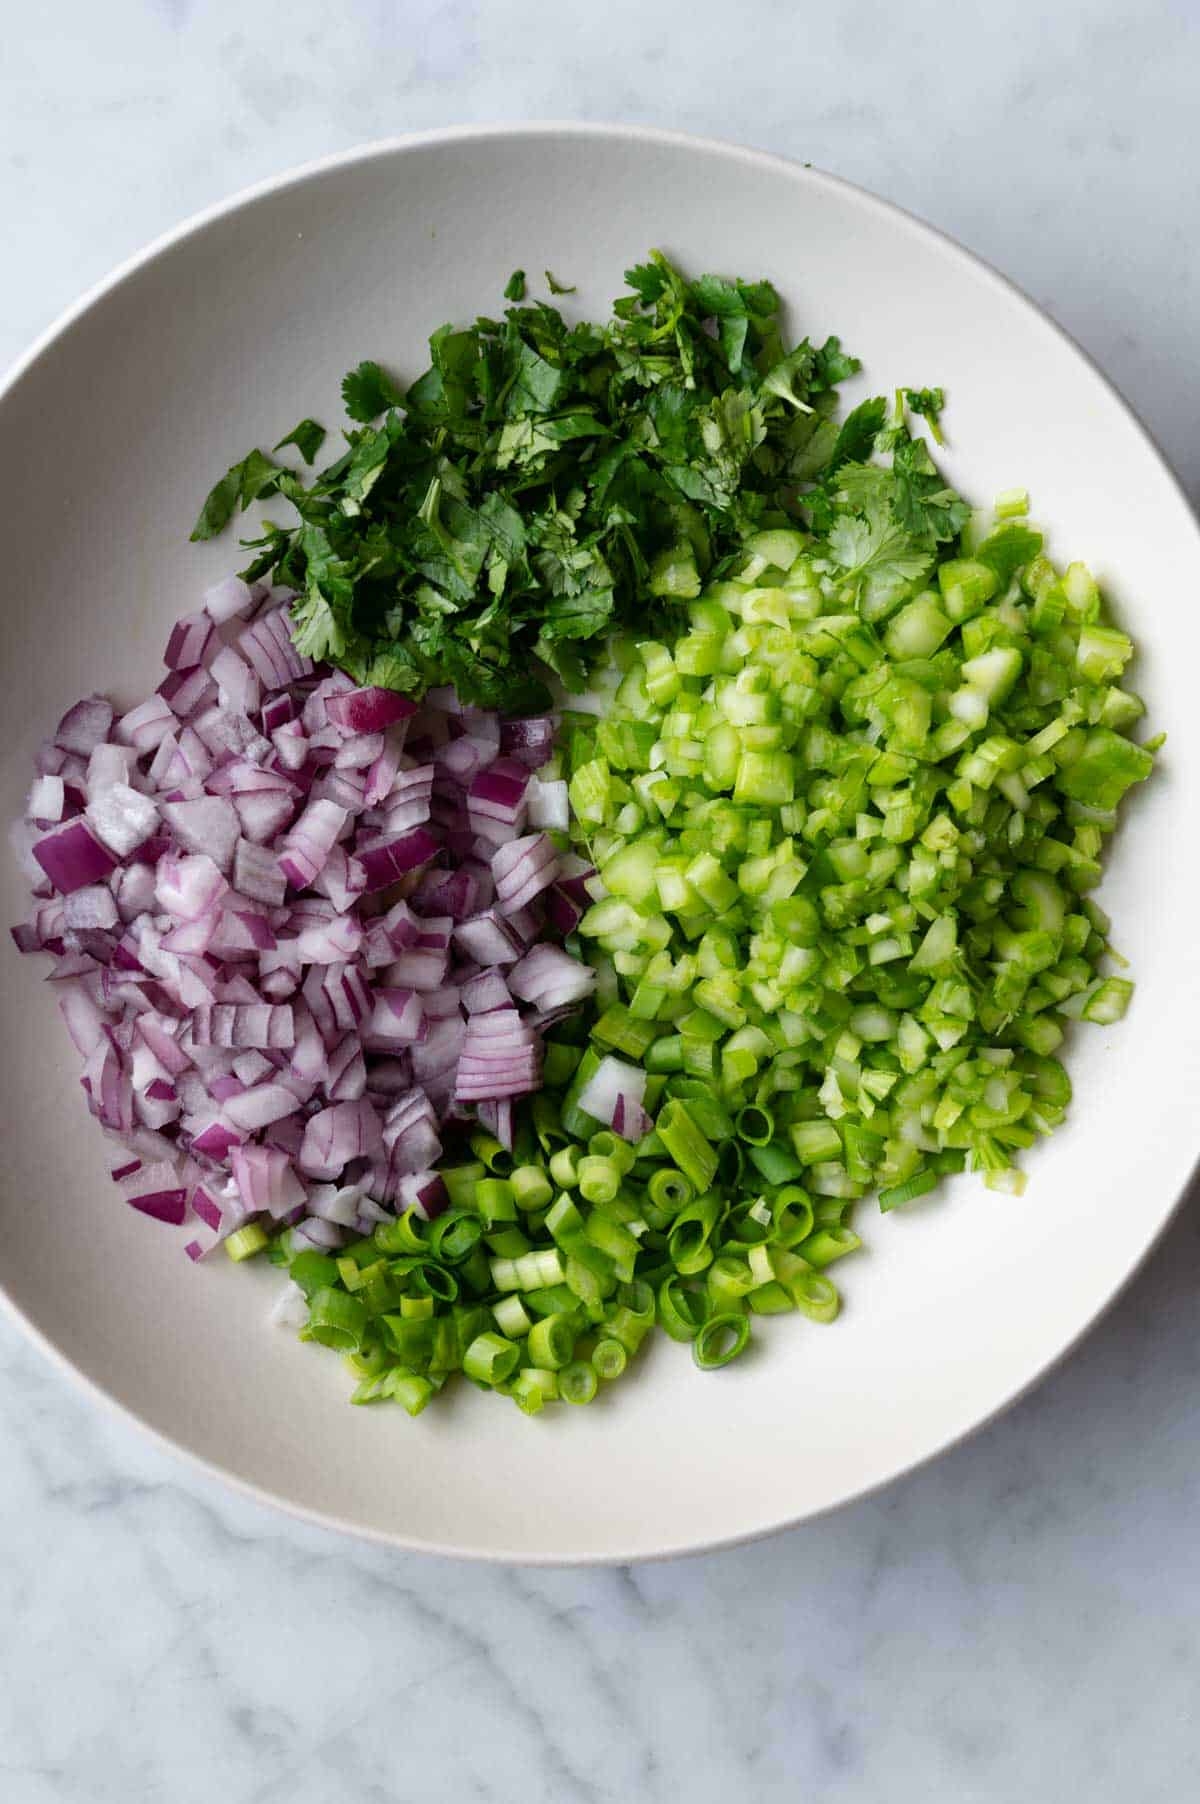 Chopped red onion, celery, green onion, and cilantro in a large white bowl.